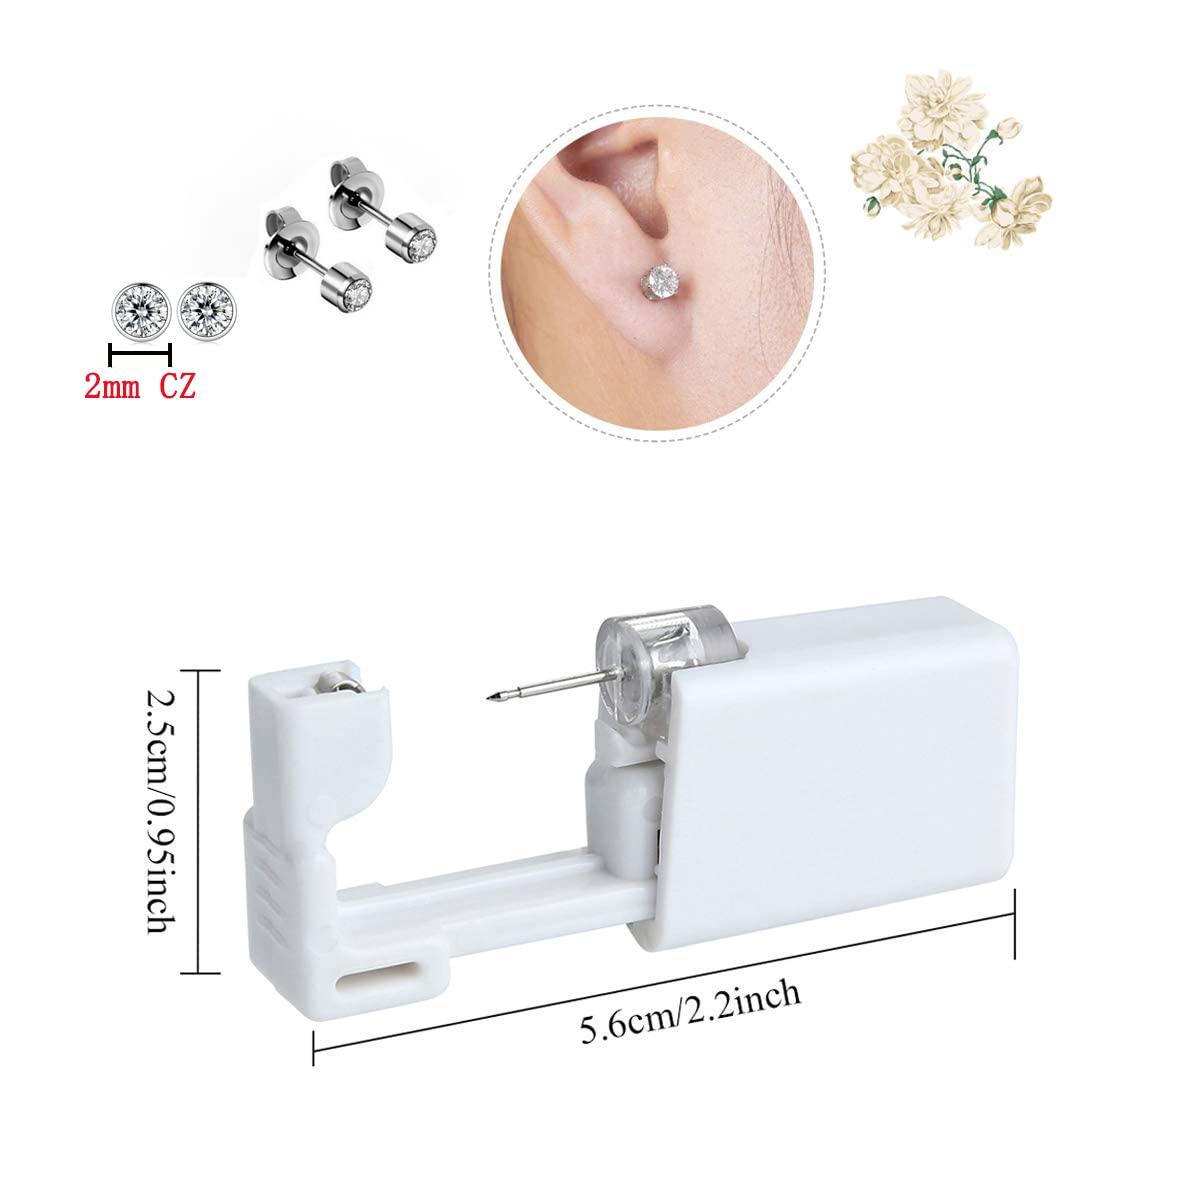 2 Pack Ear Piercing Kit, Anzero Disposable Sterile Ear Piercing Kit  Painless Ear Piercing Gun Tool with 2mm Earring Studs